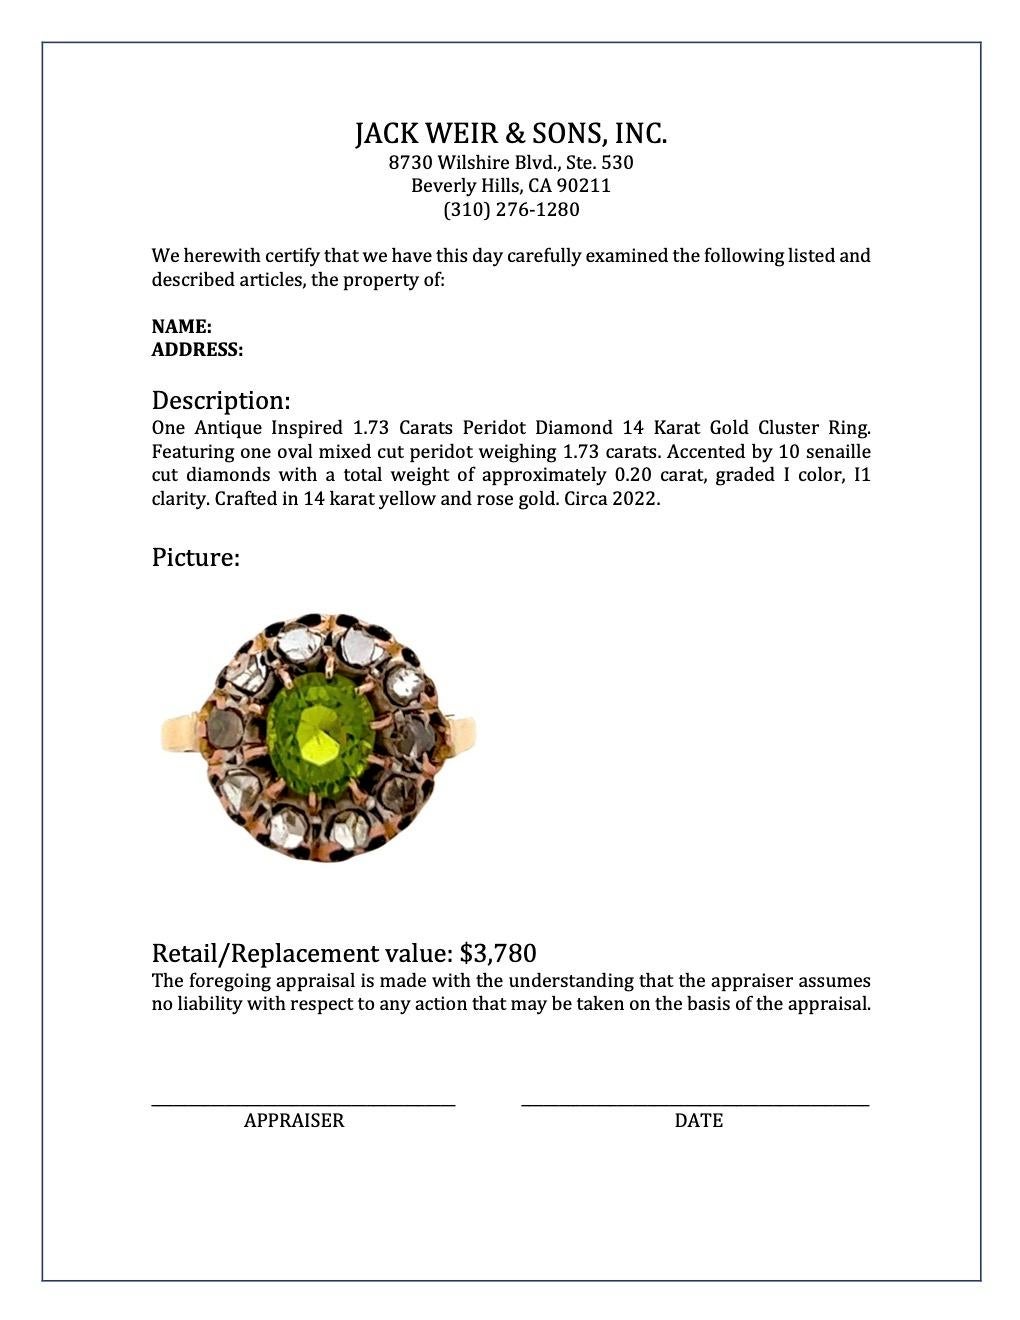 Antique Inspired 1.73 Carats Peridot Diamond 14 Karat Gold Cluster Ring For Sale 2